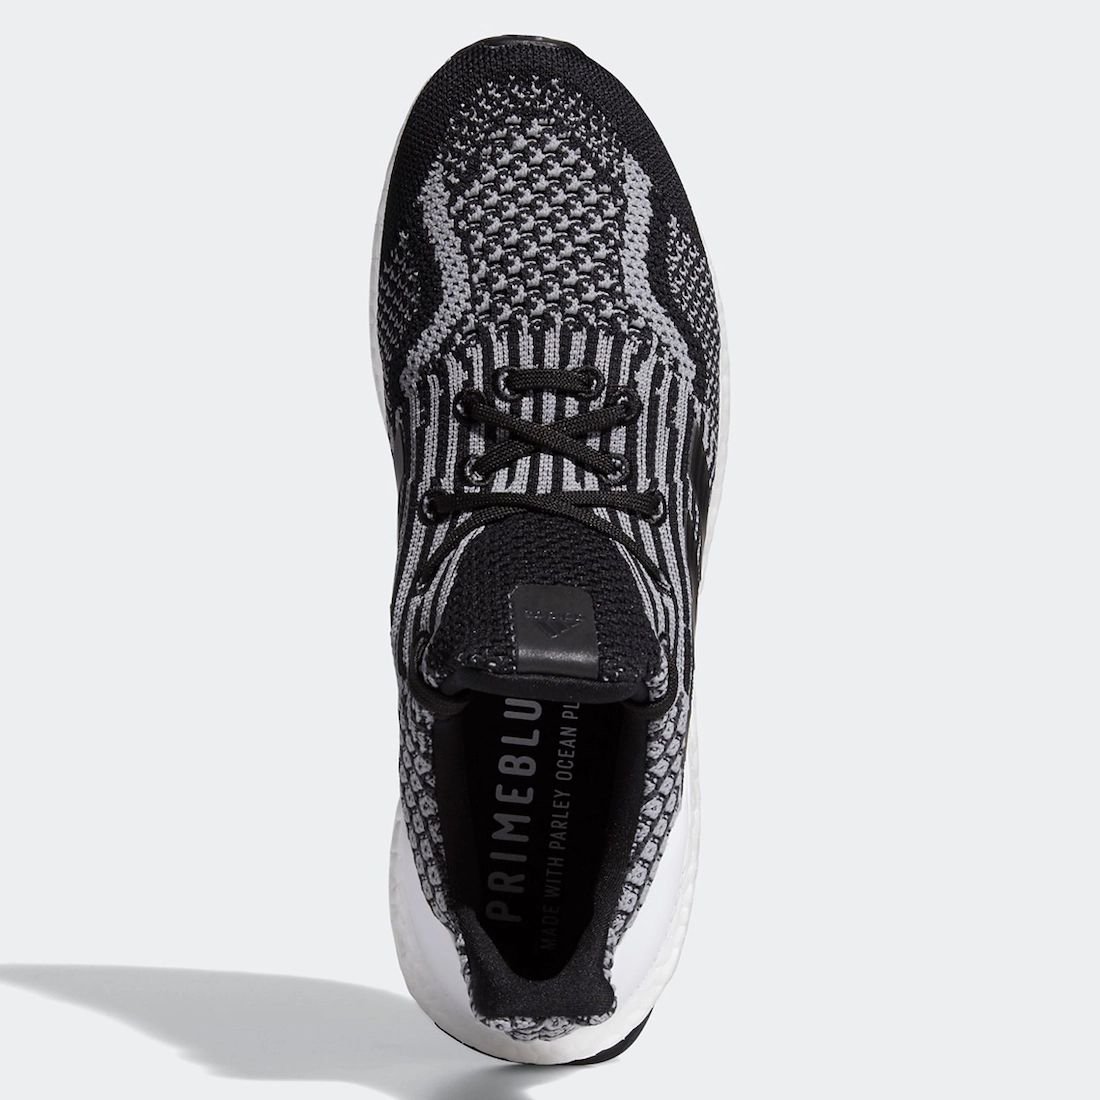 adidas Ultra Boost 5.0 Uncaged DNA Oreo G55367 Release Date Info